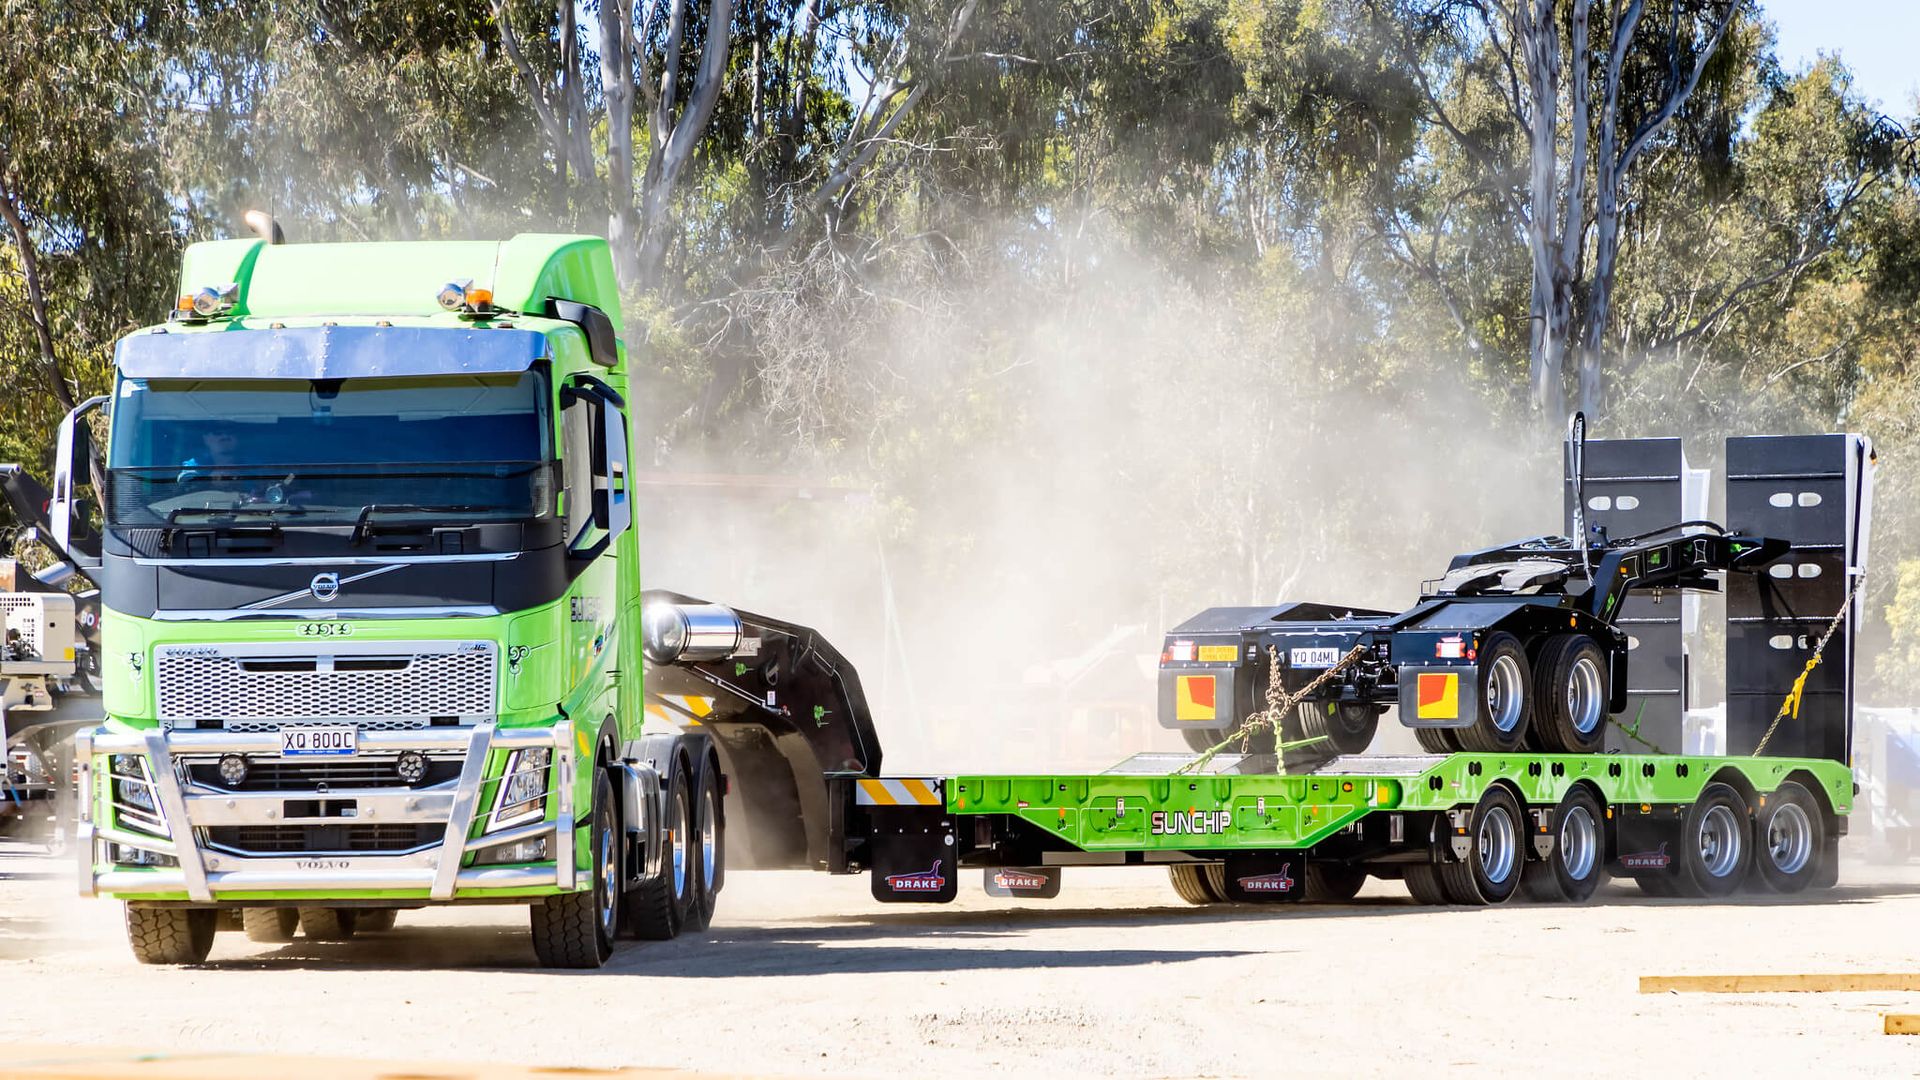 Sunchip Steering Widener and Dolly trailer - The Green Machine - kicking up dust out on the road